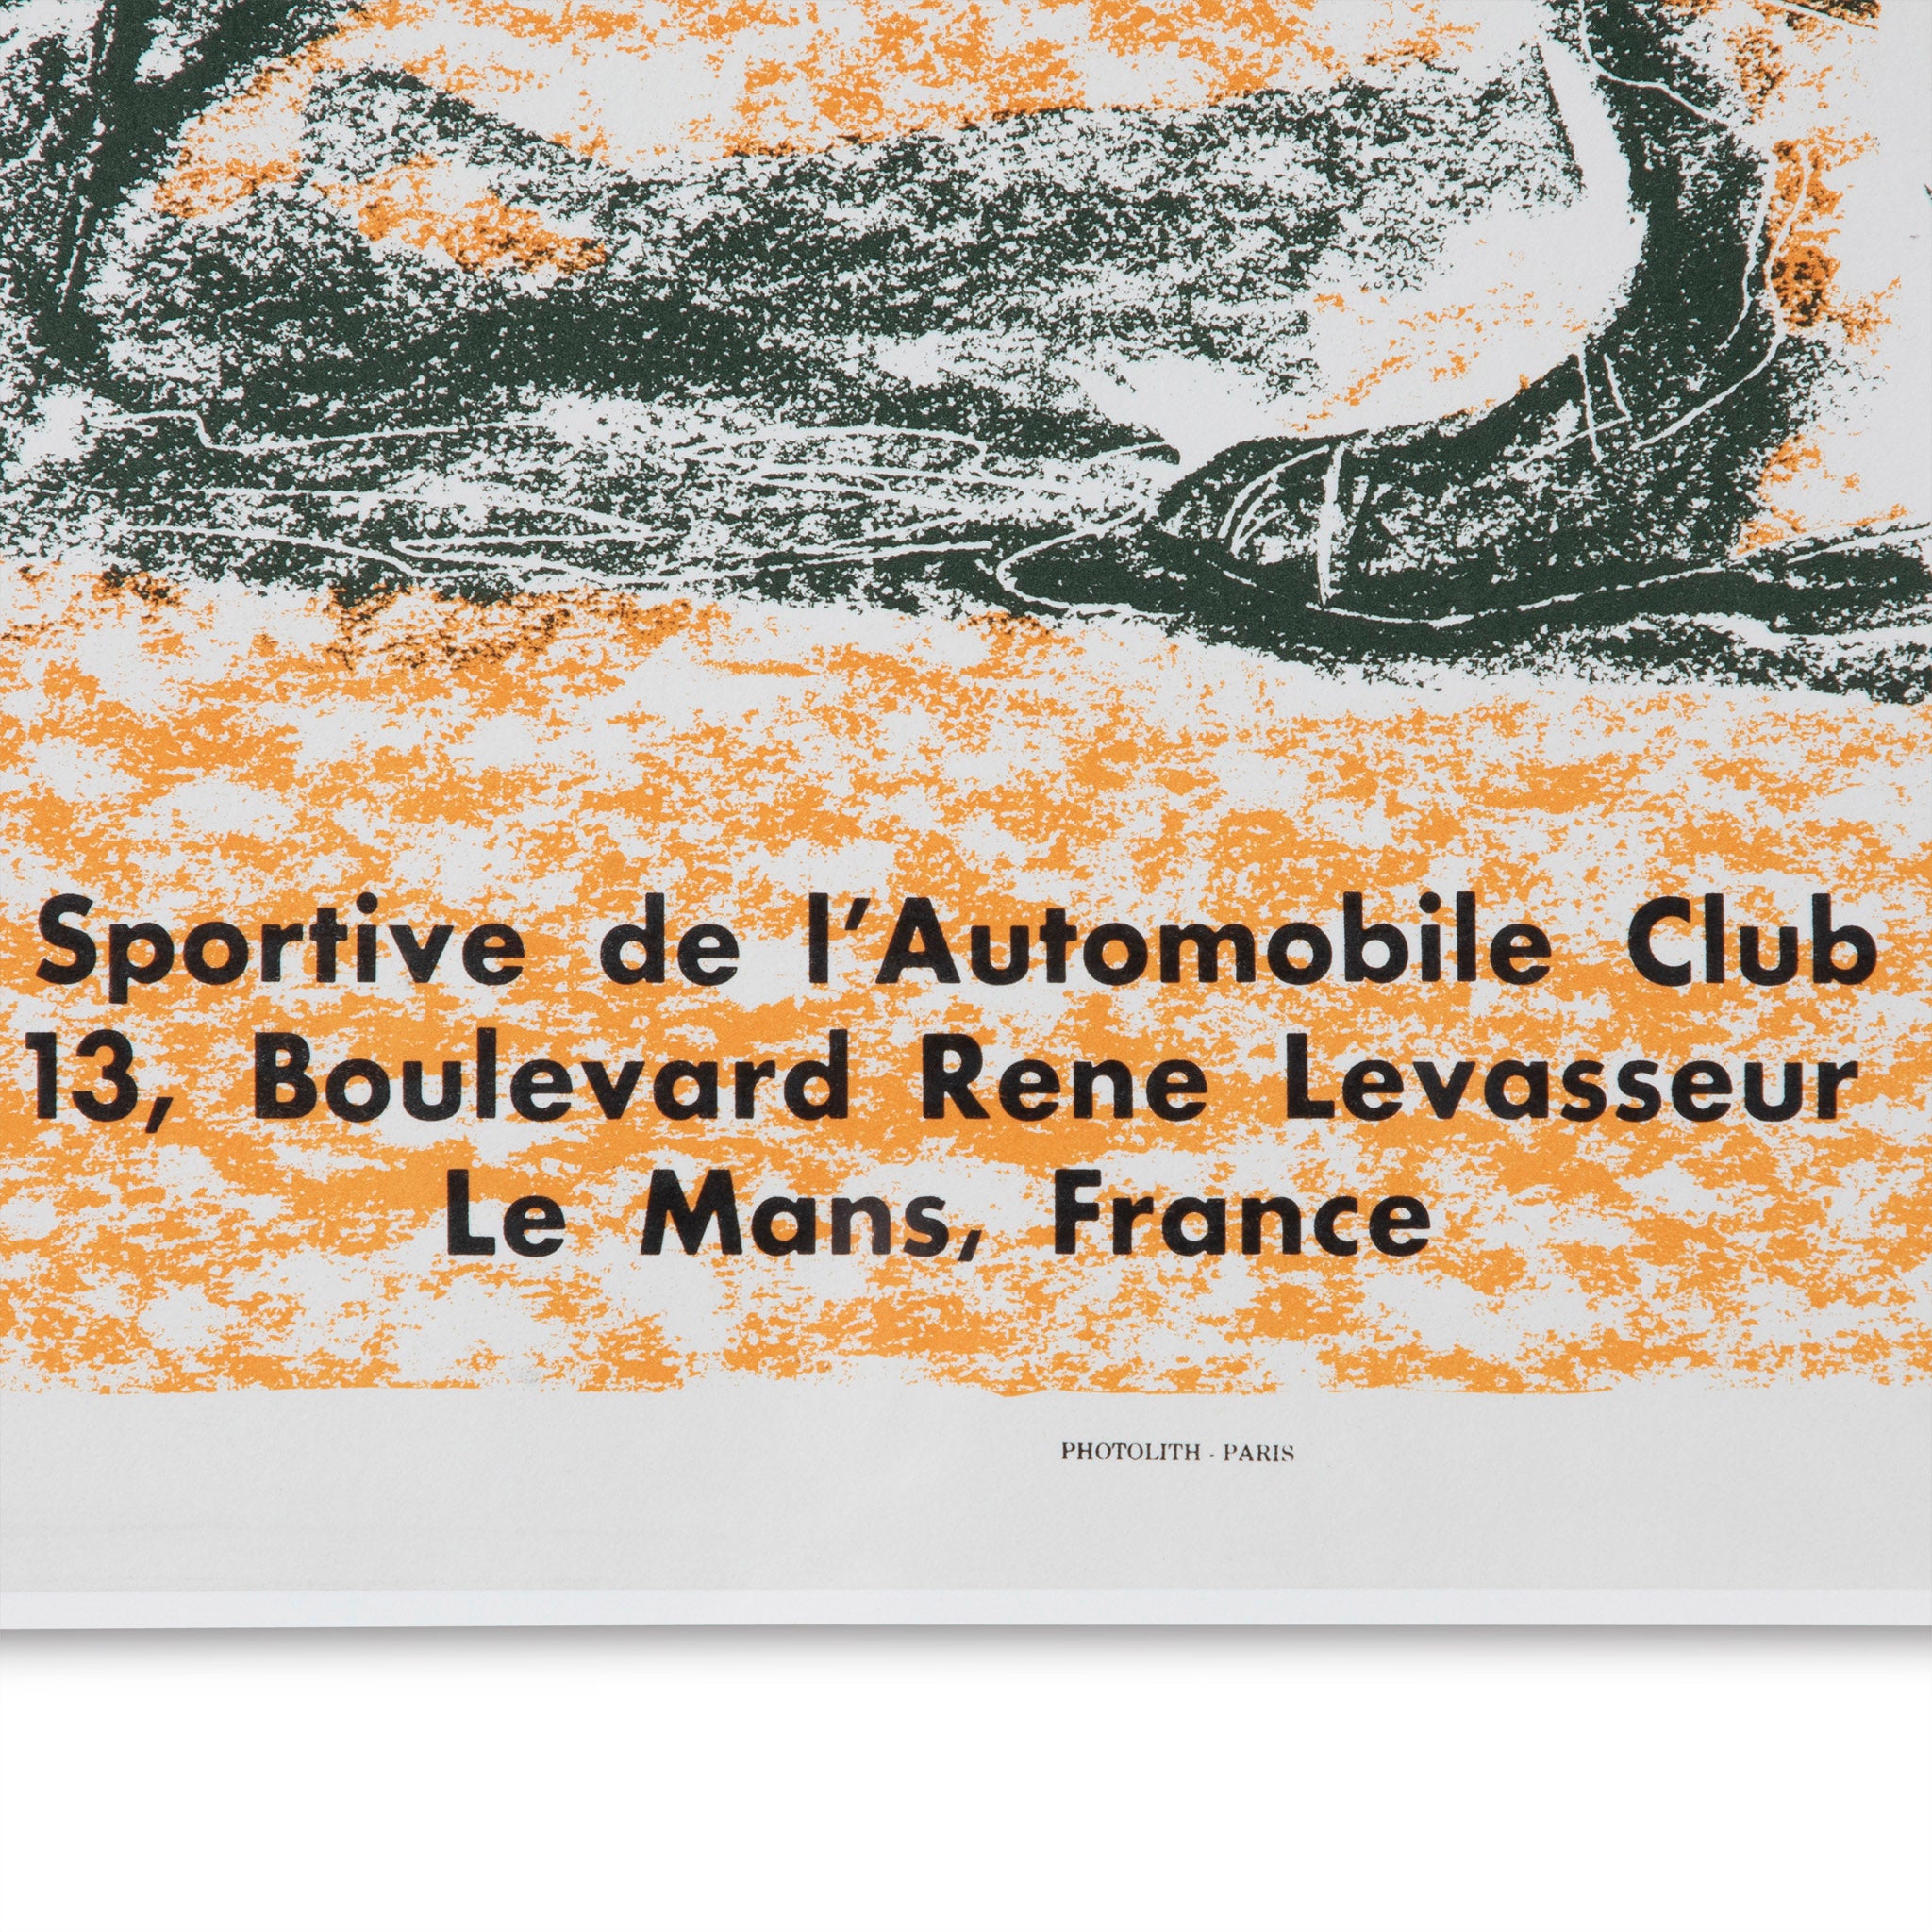 Le Mans French Auto Racing Poster 1960s